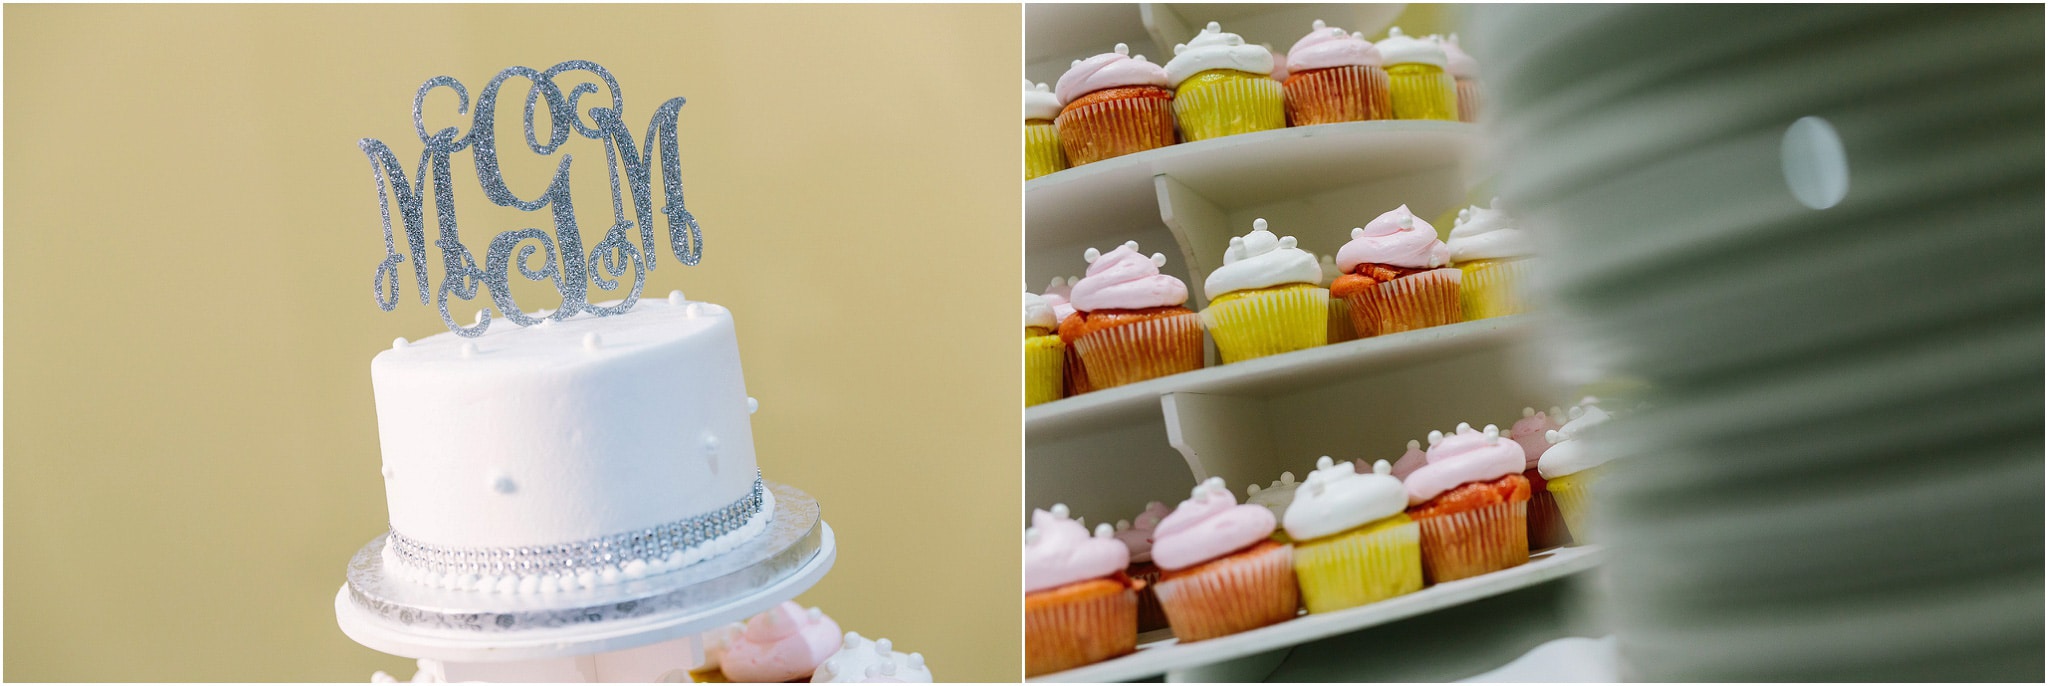 A wedding cake and some cupcakes too